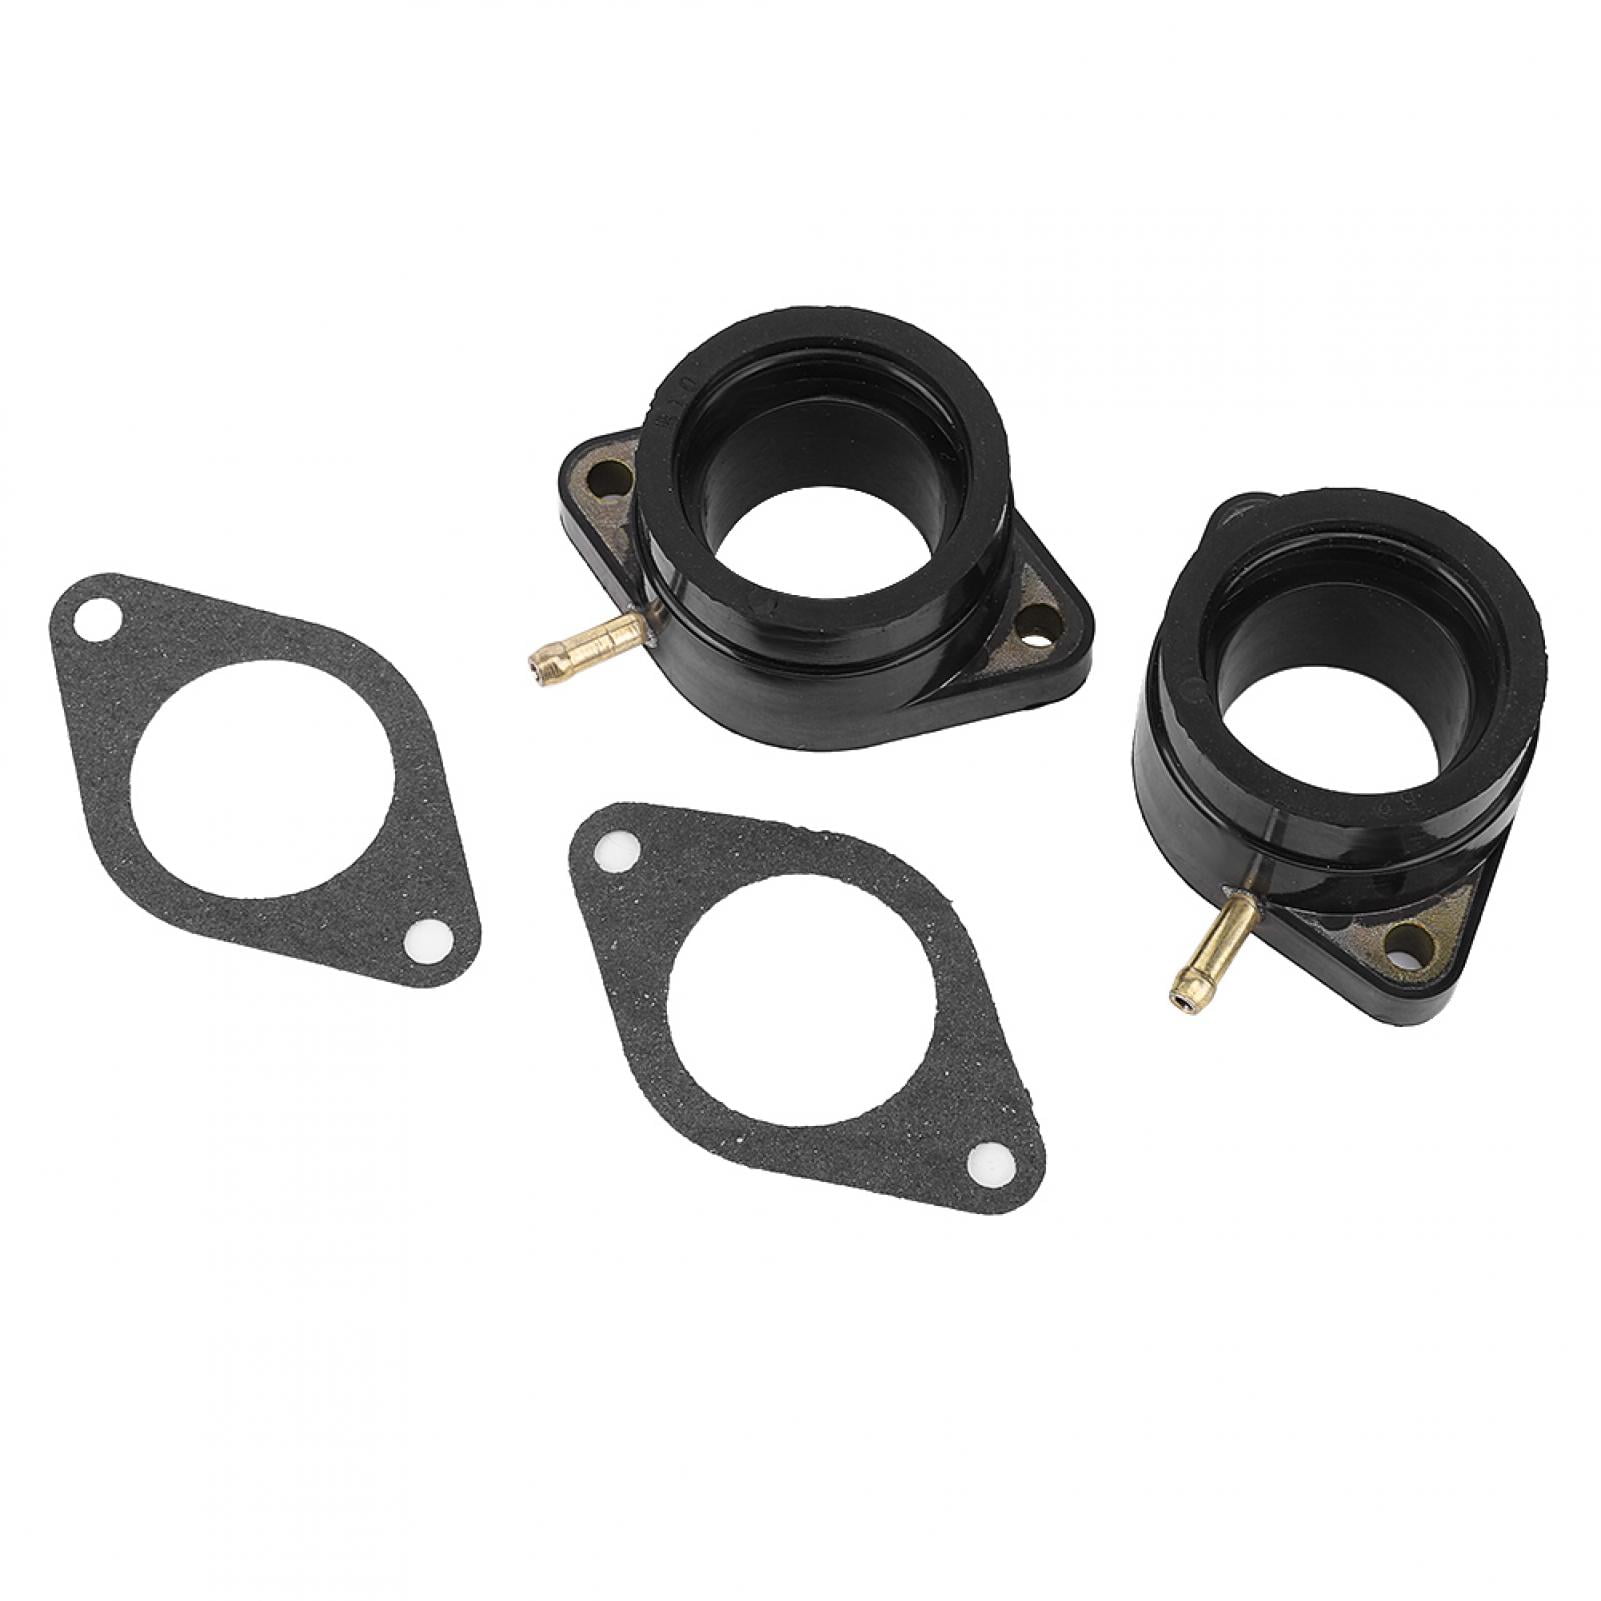 1 Pair Carb Holders Intake Manifold Boots Gaskets Standard Fit for Yamaha XS400 1977-1981 Intake Manifold Boots Gaskets 